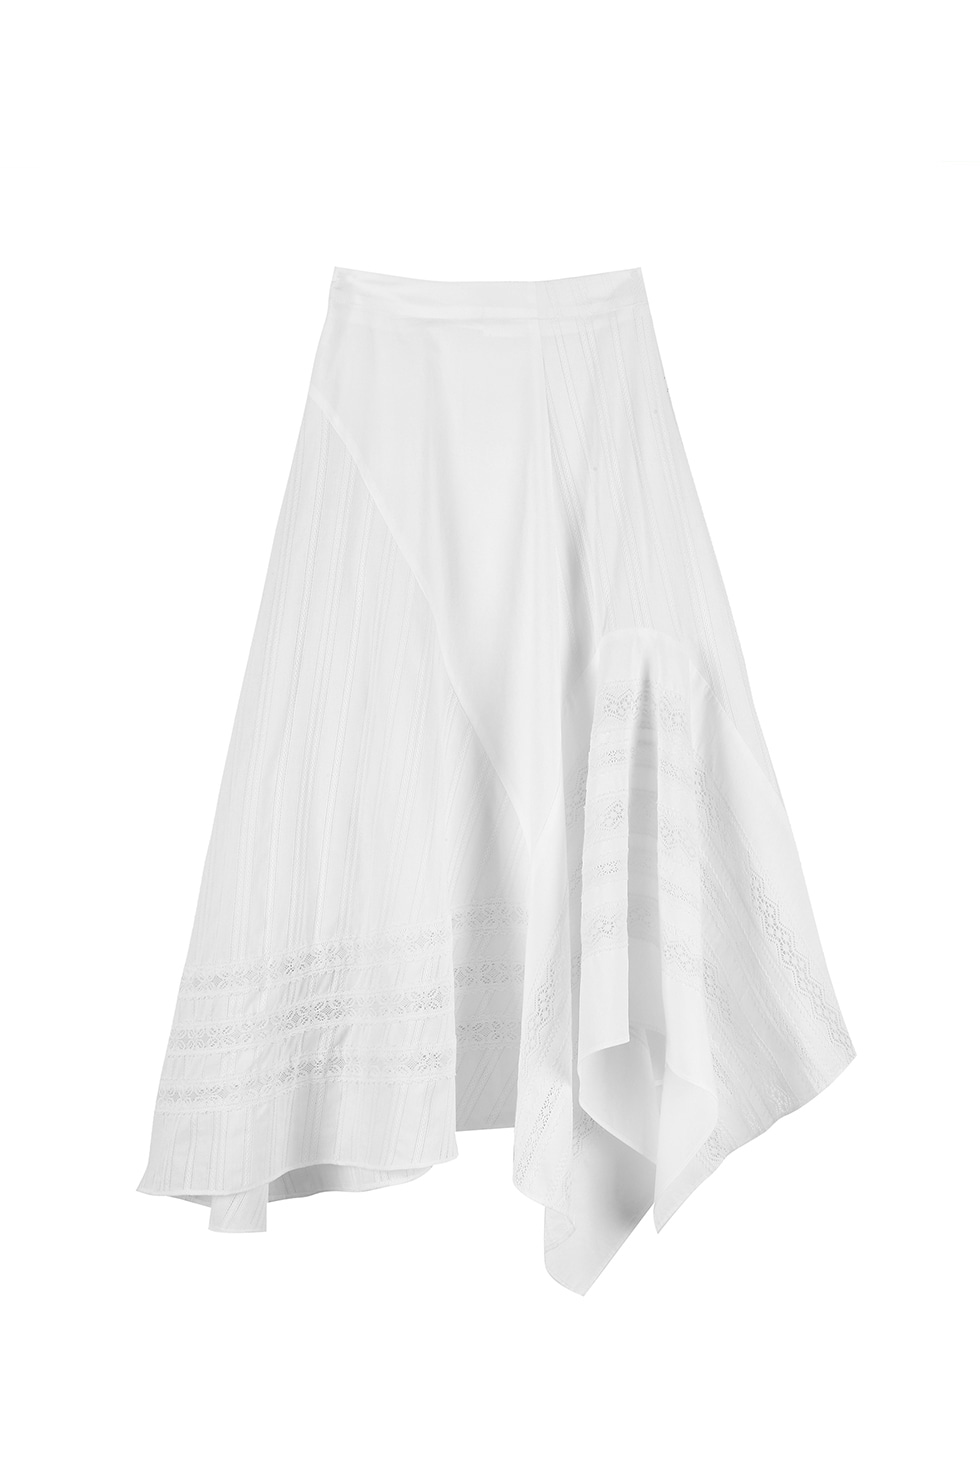 LACE TAPE SKIRT - WHITE